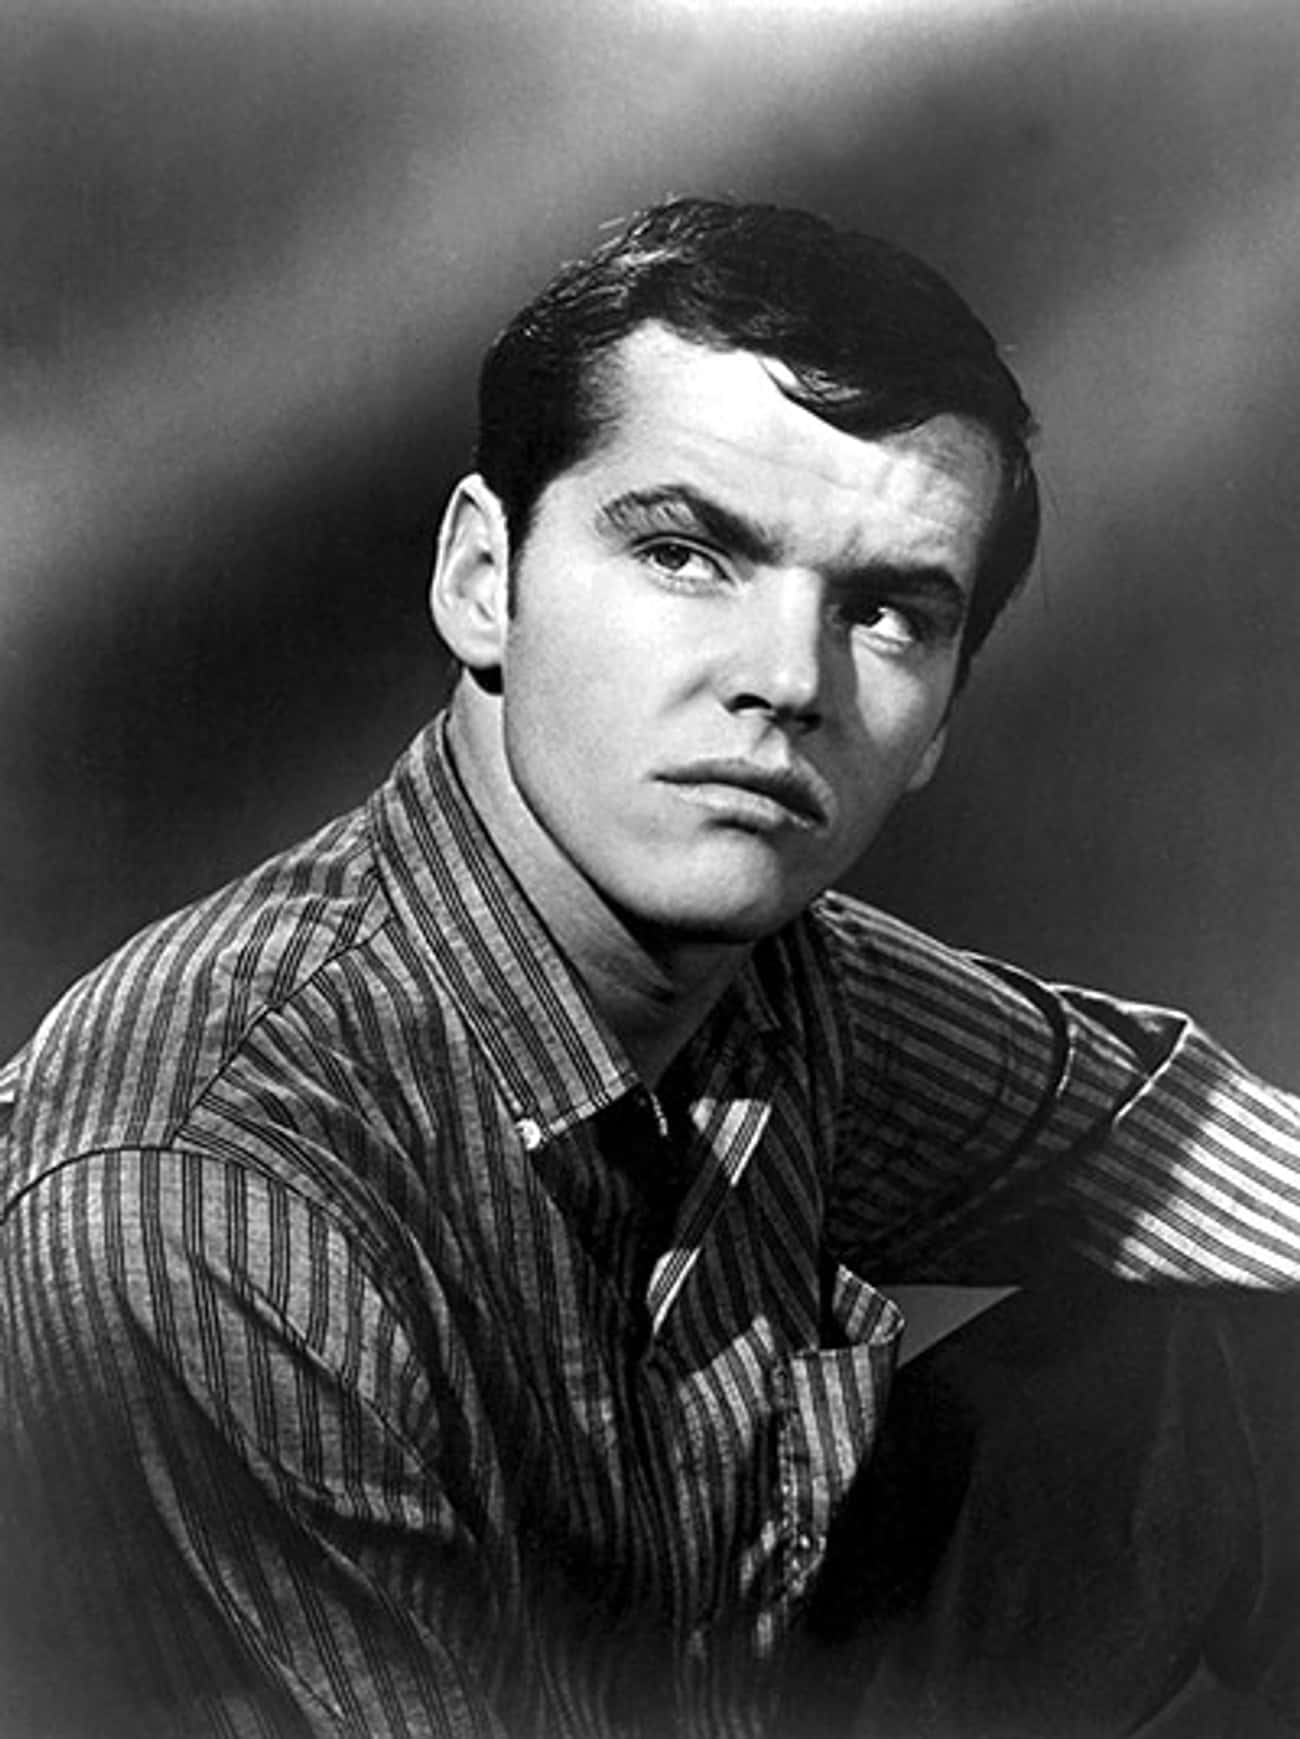 Young Jack Nicholson in Gray and Black Striped Buttondown